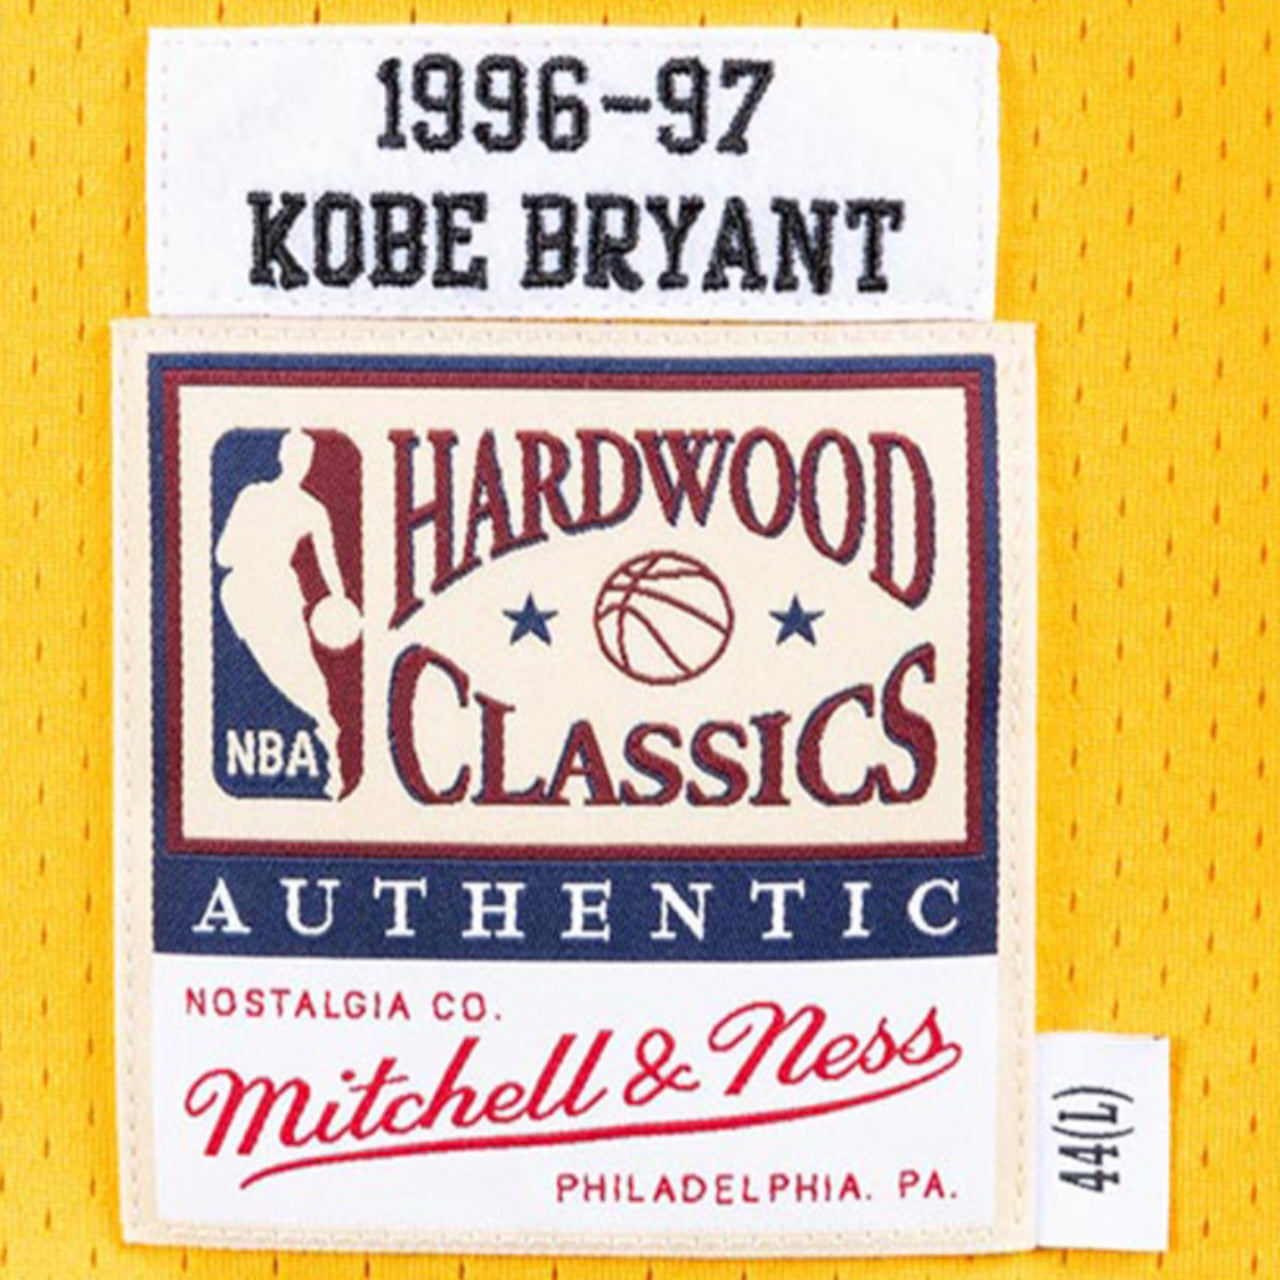 Mitchell and Ness Kobe Bryant Los Angeles Lakers 1996-1997 Rookie Season Home Authentic Jersey - Yellow #8 - Hoop Jersey Store